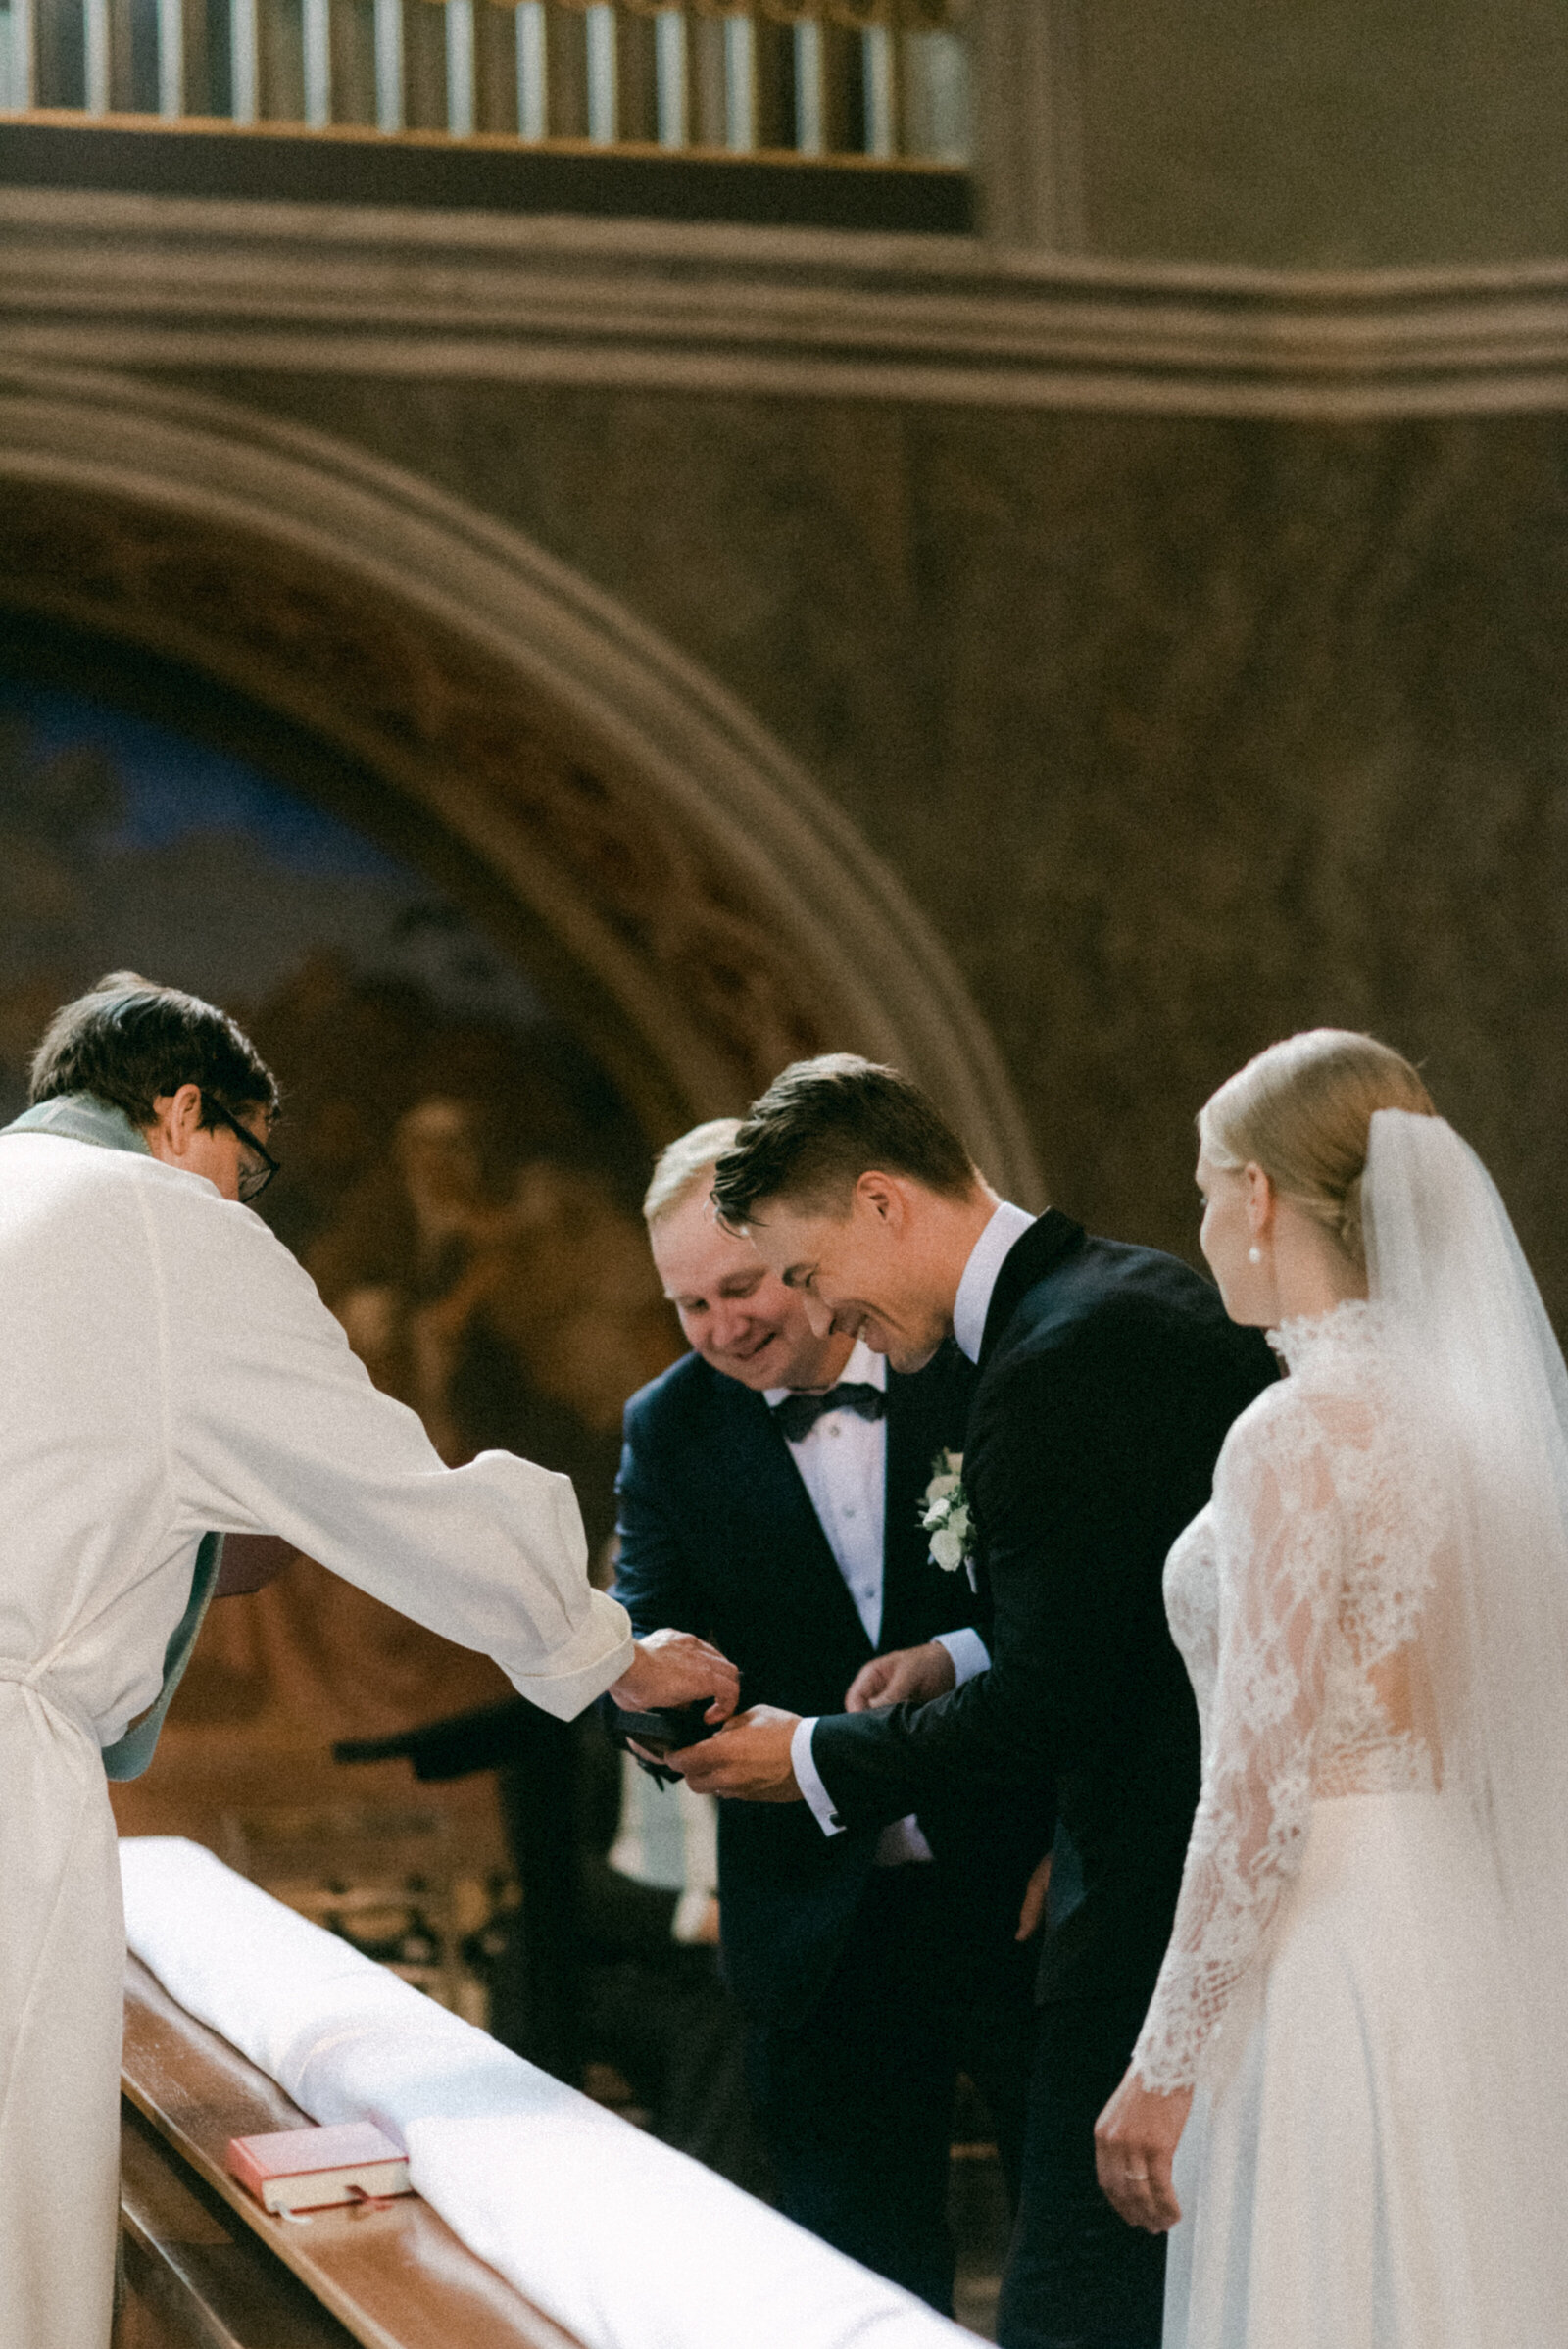 Bestman handing over the wedding ring during the ceremony in Turku cathedra.. Documentary image by wedding photographer Hannika Gabrielsson.